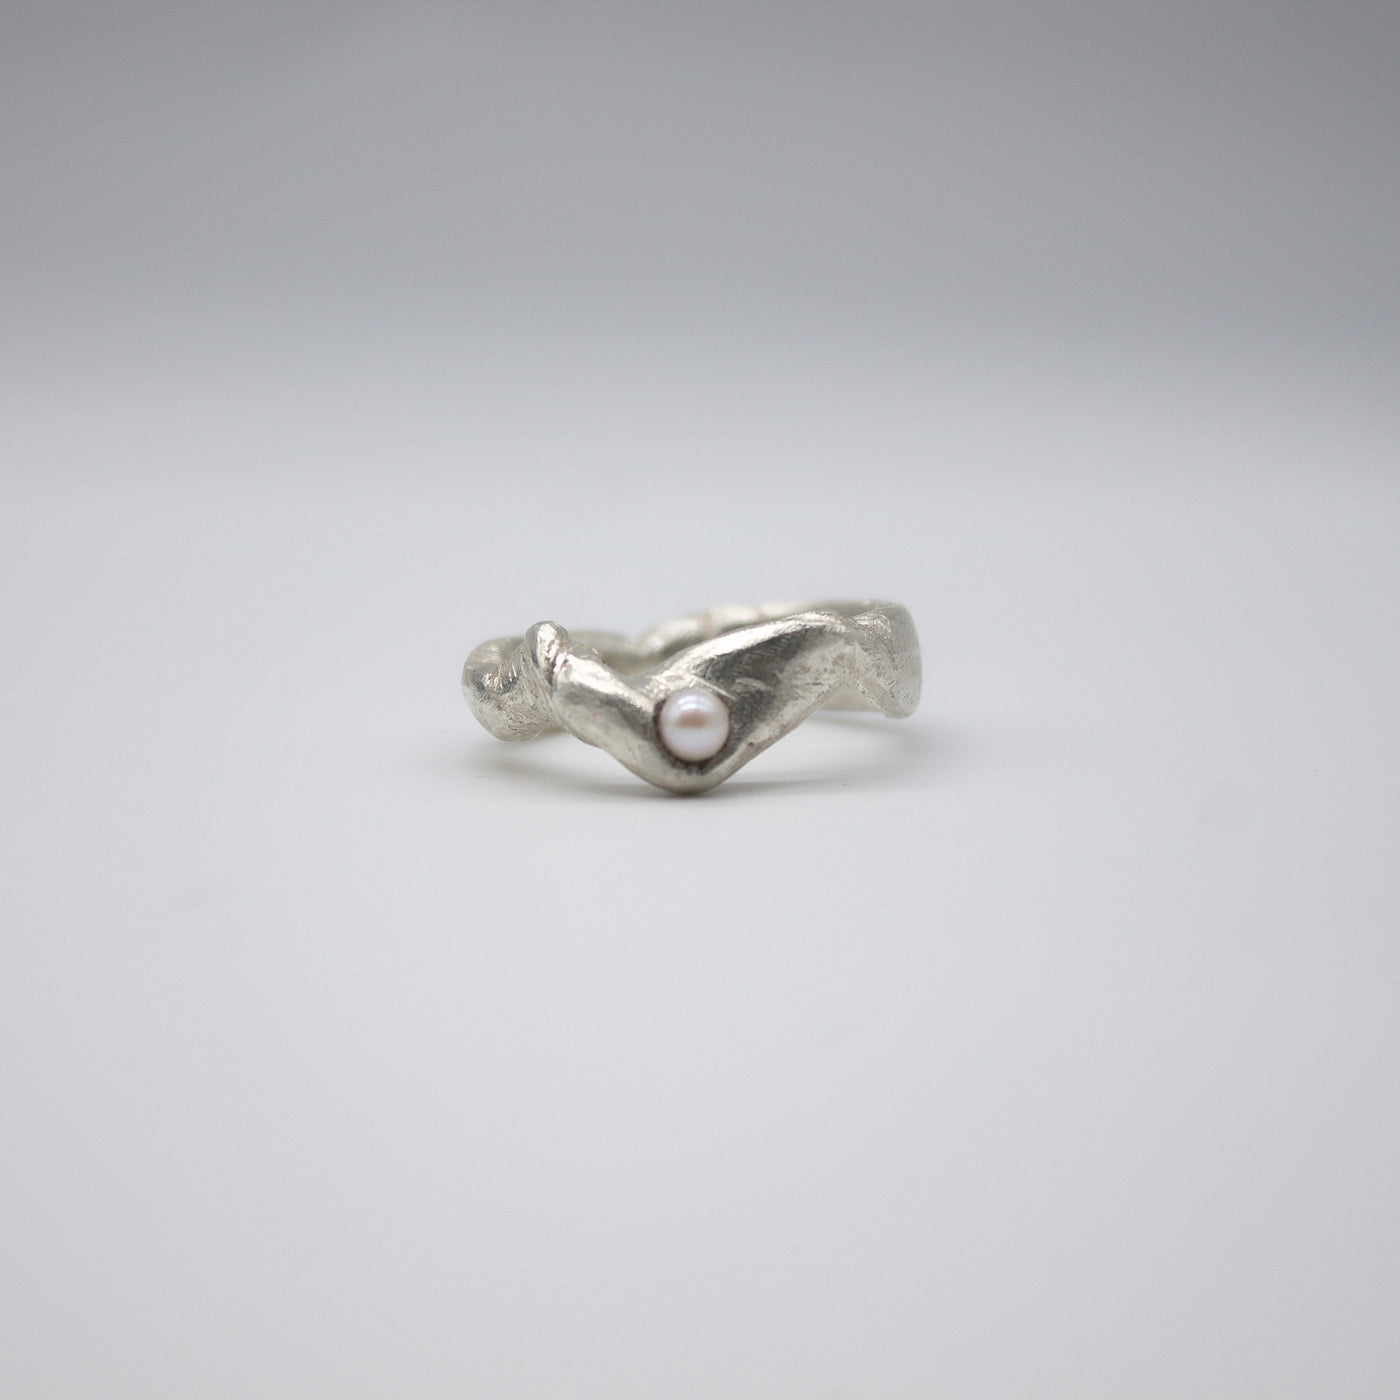 GJERDE // Fine silver ring with a small freshwater pearl